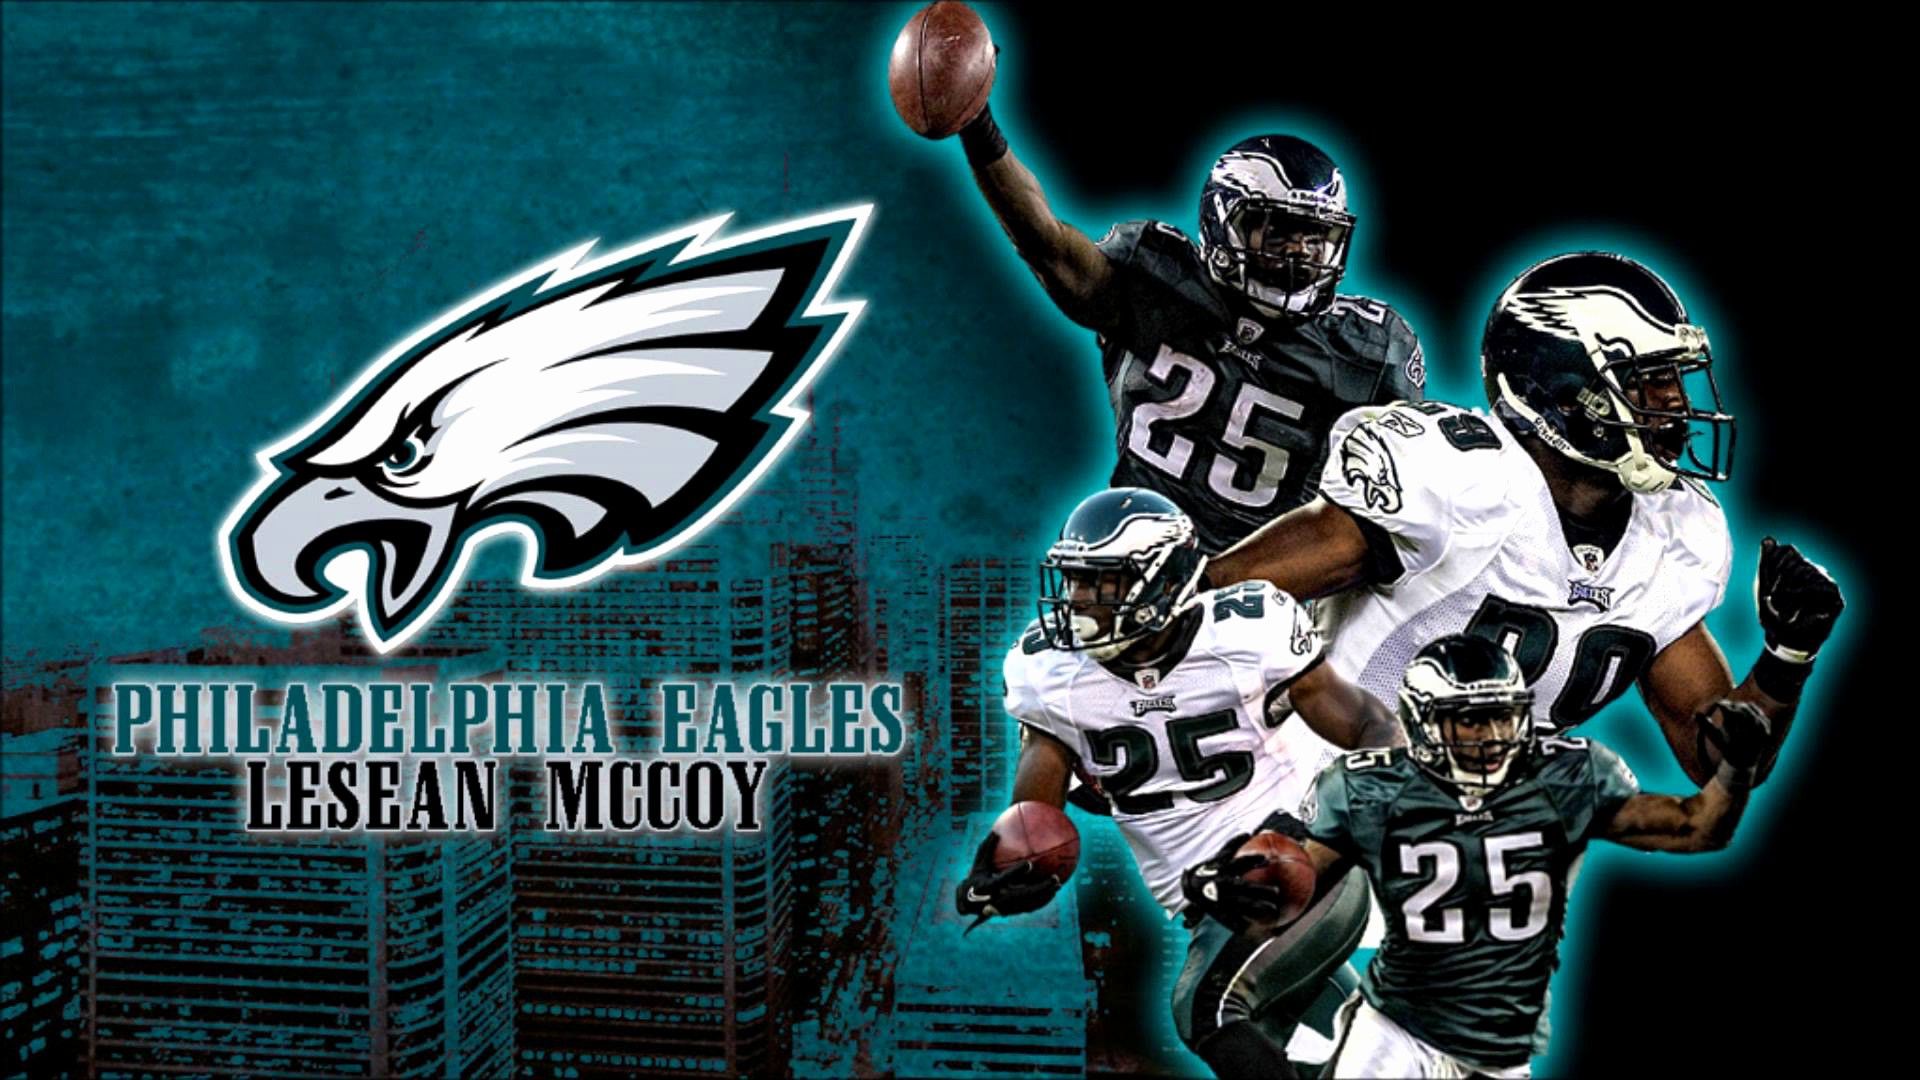 Eagles wallpaper I did for my buddy  he requested the specific players   if anyone enjoys this content please follow my IG LHGRFX  Bills fan in  peace  reagles